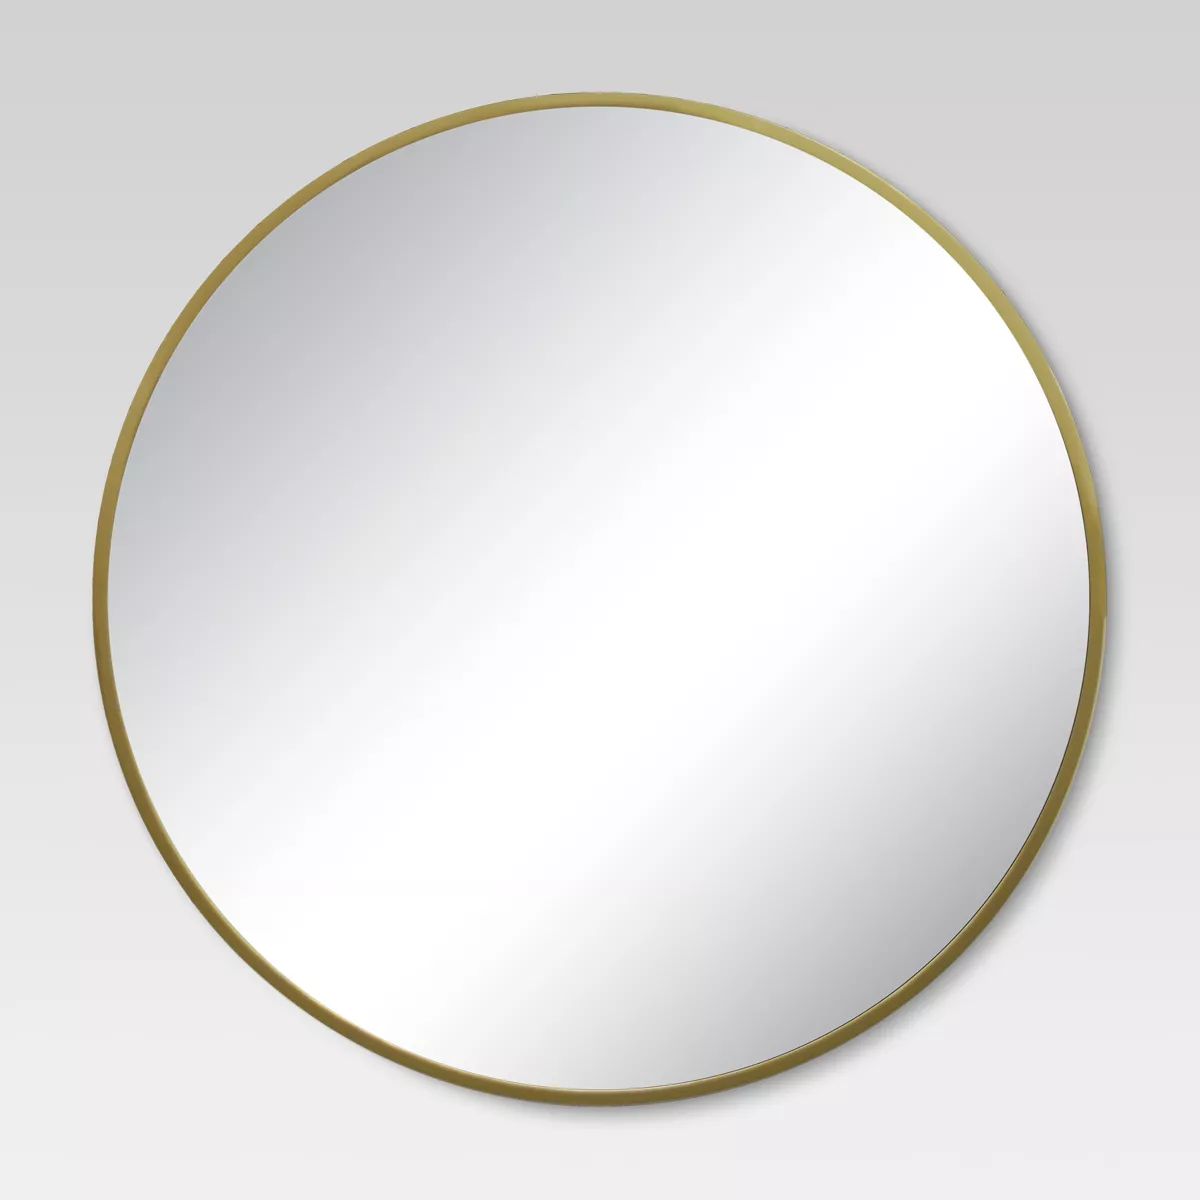 28" Round Decorative Wall Mirror Brass - Project 62™ | Target